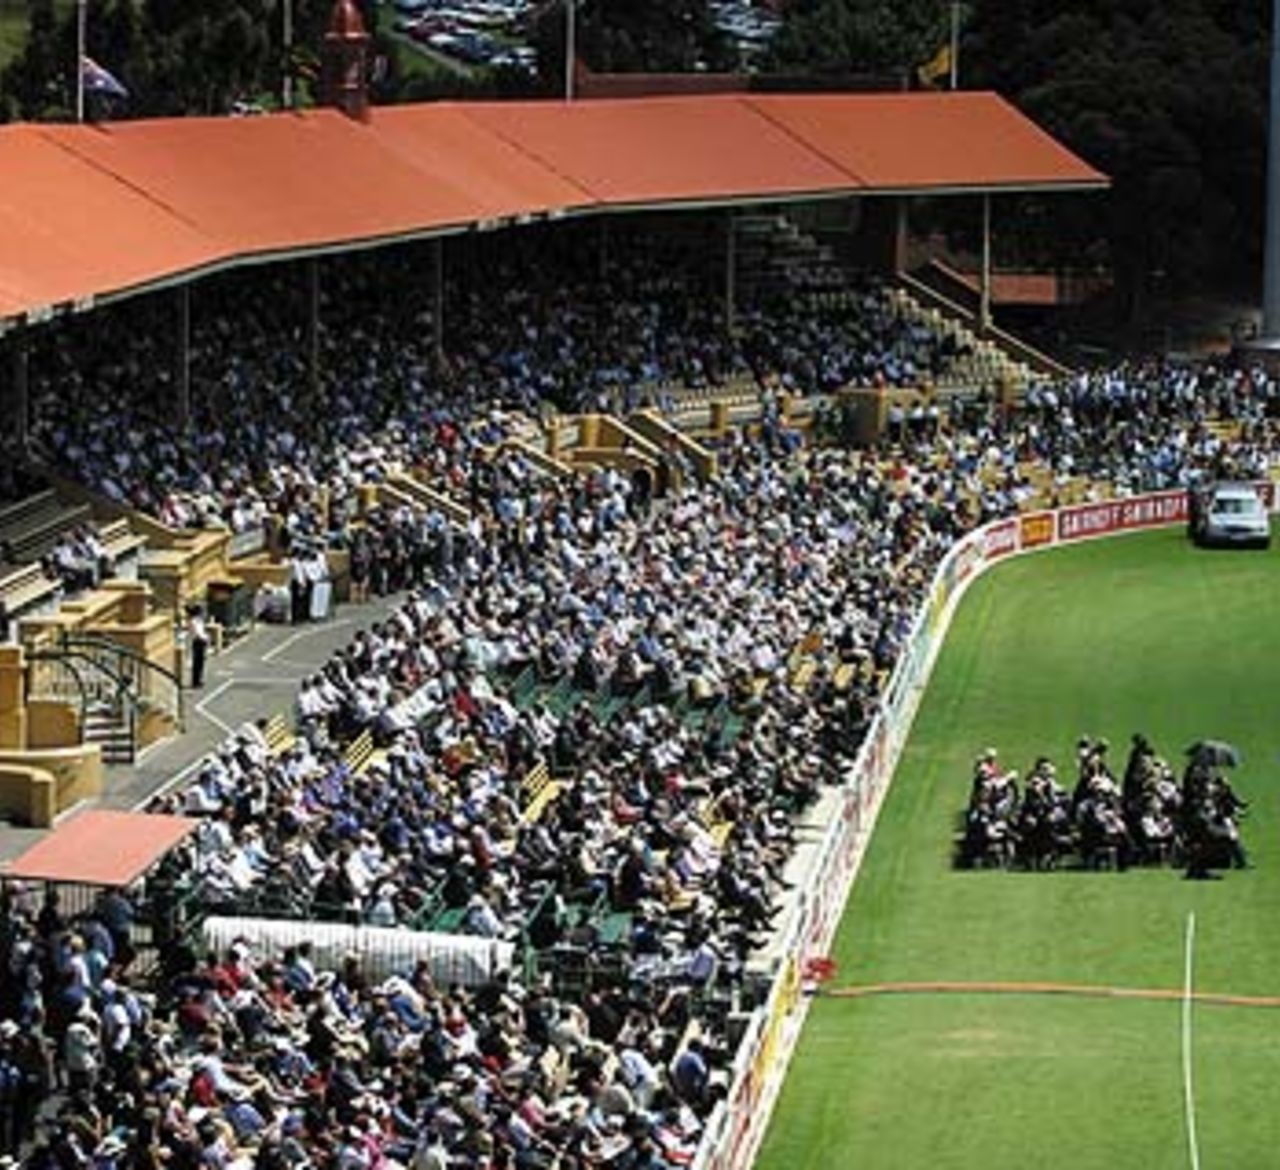 Thousands cram the stands at the Adelaide Oval during a funeral service for David Hookes, Adelaide, January 27 2004